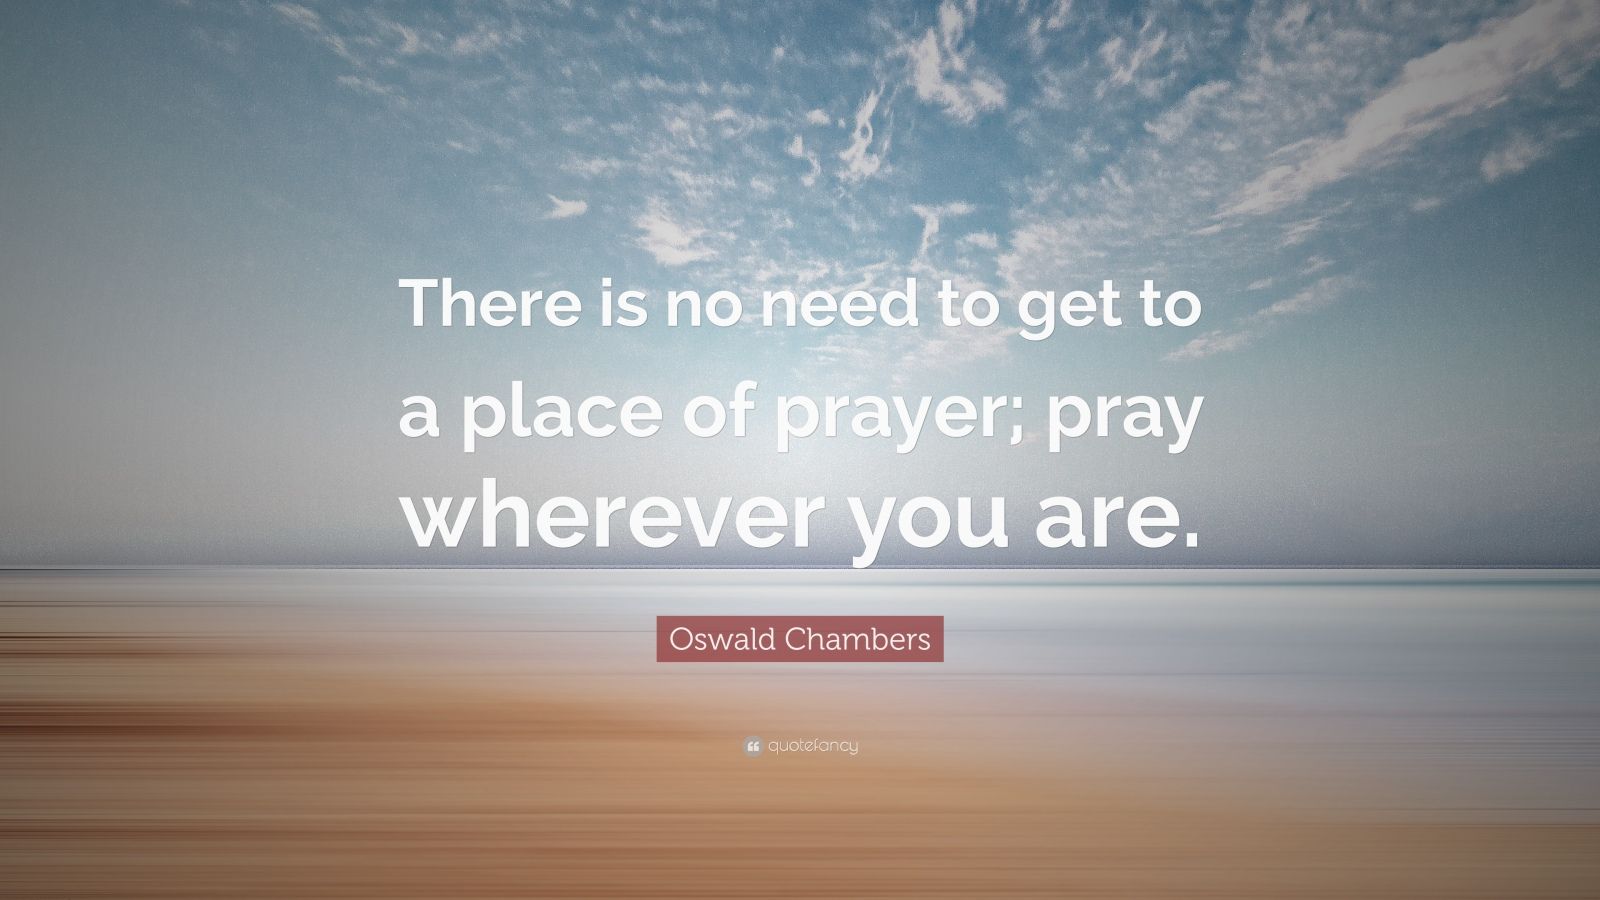 Oswald Chambers Quote: “There is no need to get to a place of prayer ...